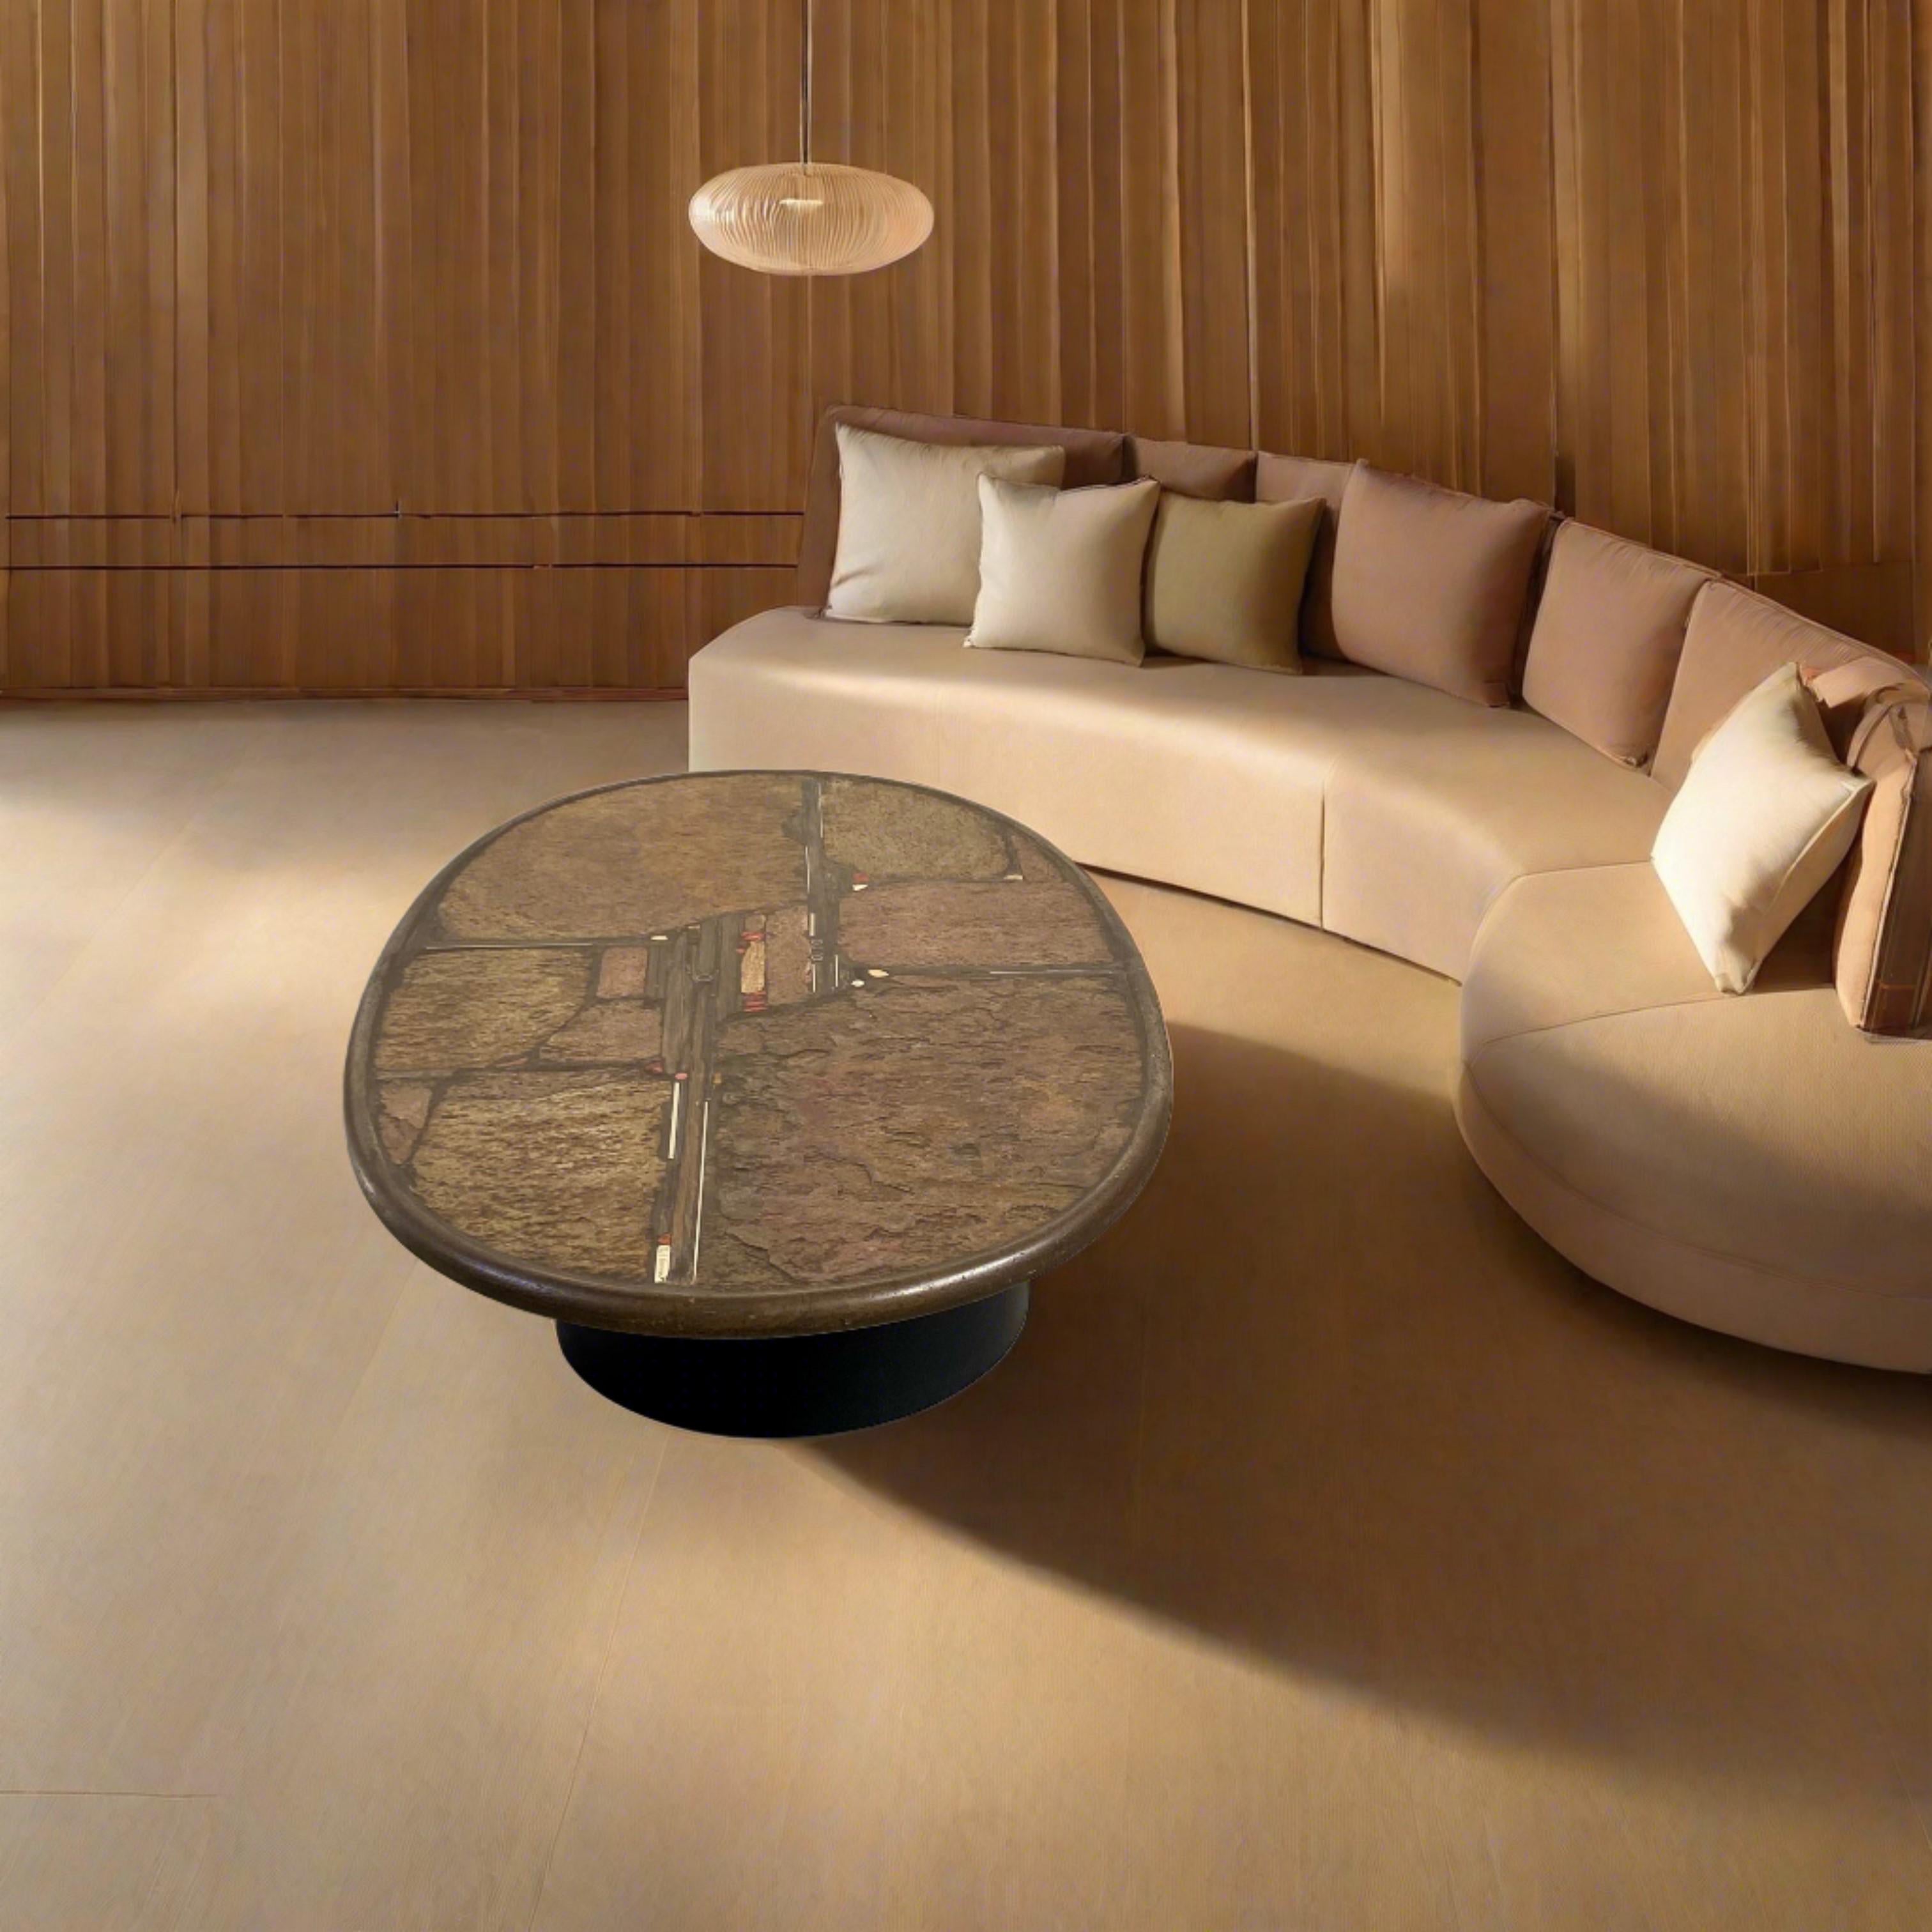 Brutalist Oval Coffee Table by Sculptor Paul Kingma †, Netherlands 1994

Introducing the Brutalist Round Coffee Table by renowned sculptor Paul Kingma, crafted in the Netherlands in 1994. This iconic piece is a testament to Kingma's unique aesthetic